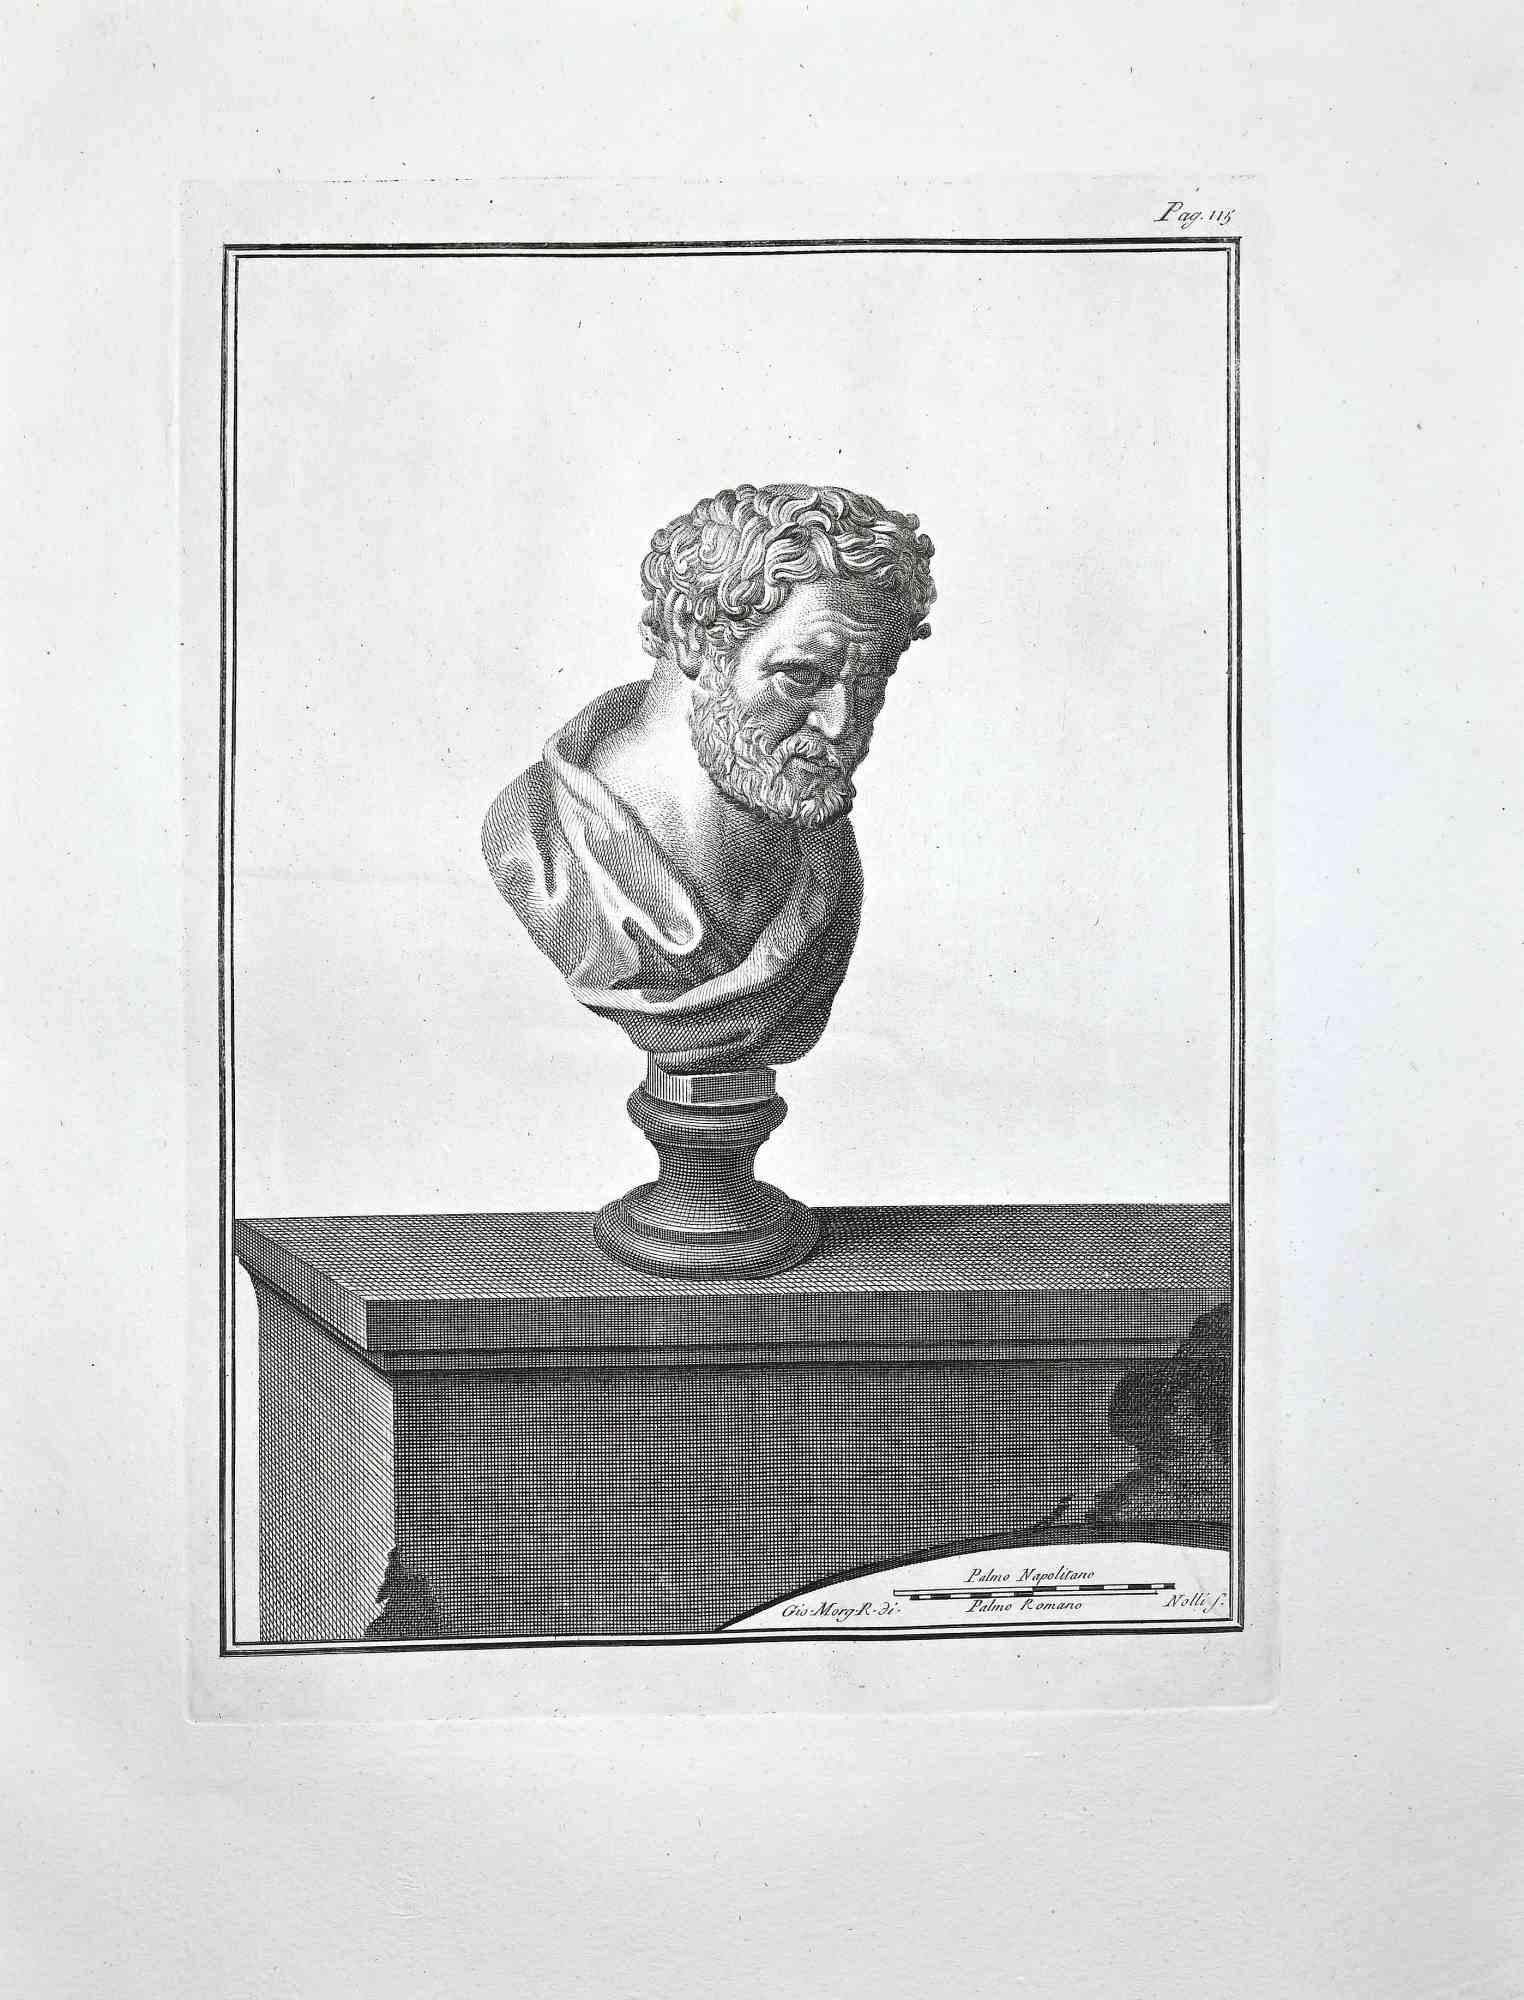 Ancient Roman Bust, from the series "Antiquities of Herculaneum", is an original etching on paper realized by Bernardino Nolli.

Signed on the plate, on the lower right.

Very good conditions.

The etching belongs to the print suite “Antiquities of